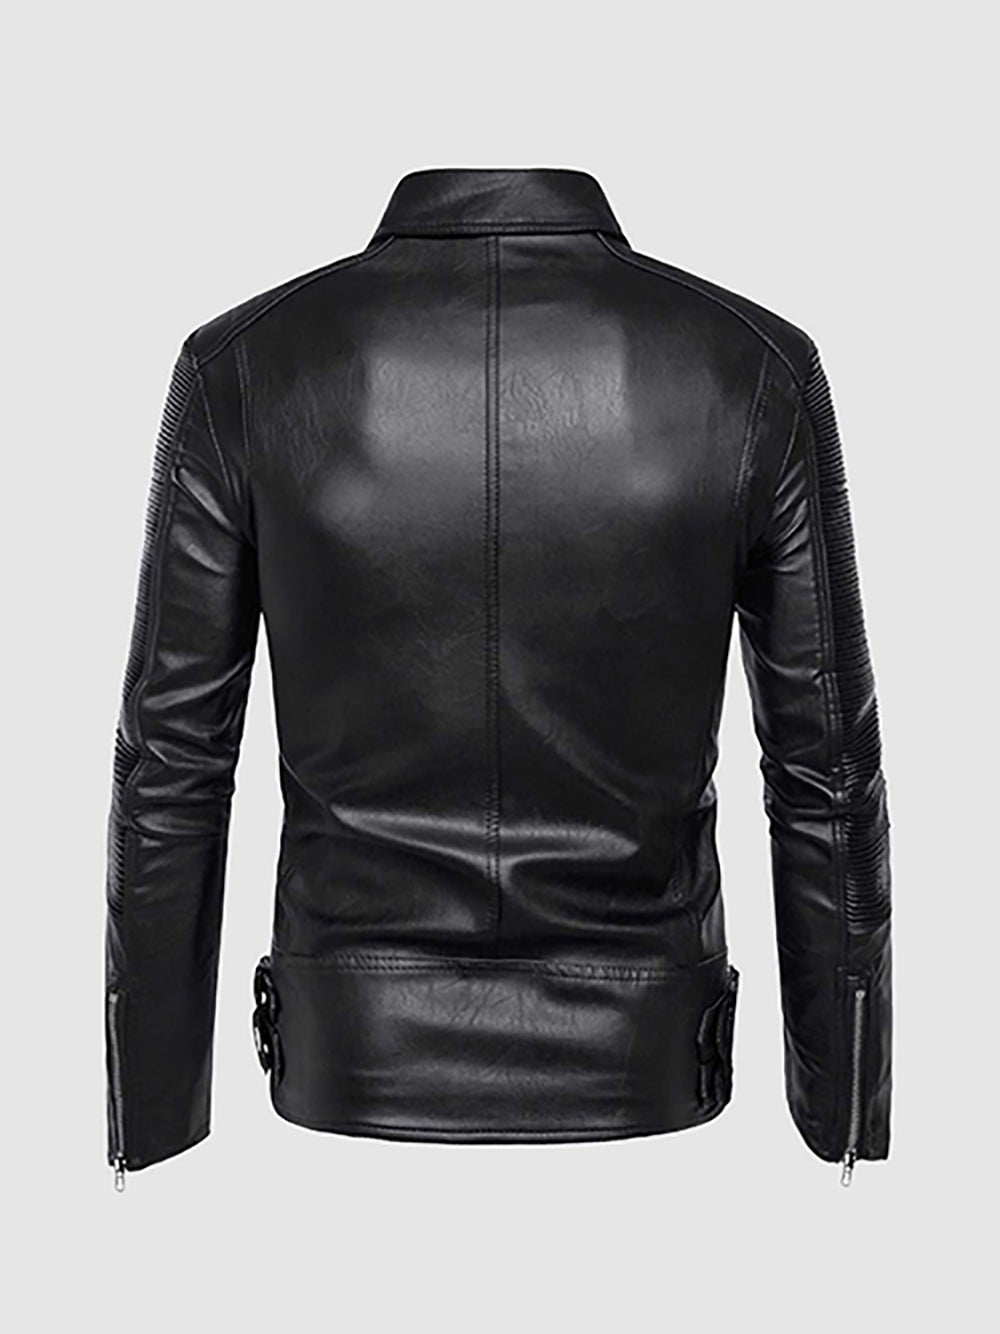 Download Men's Retro Leather Motorcycle Jacket in Black | Leather ...